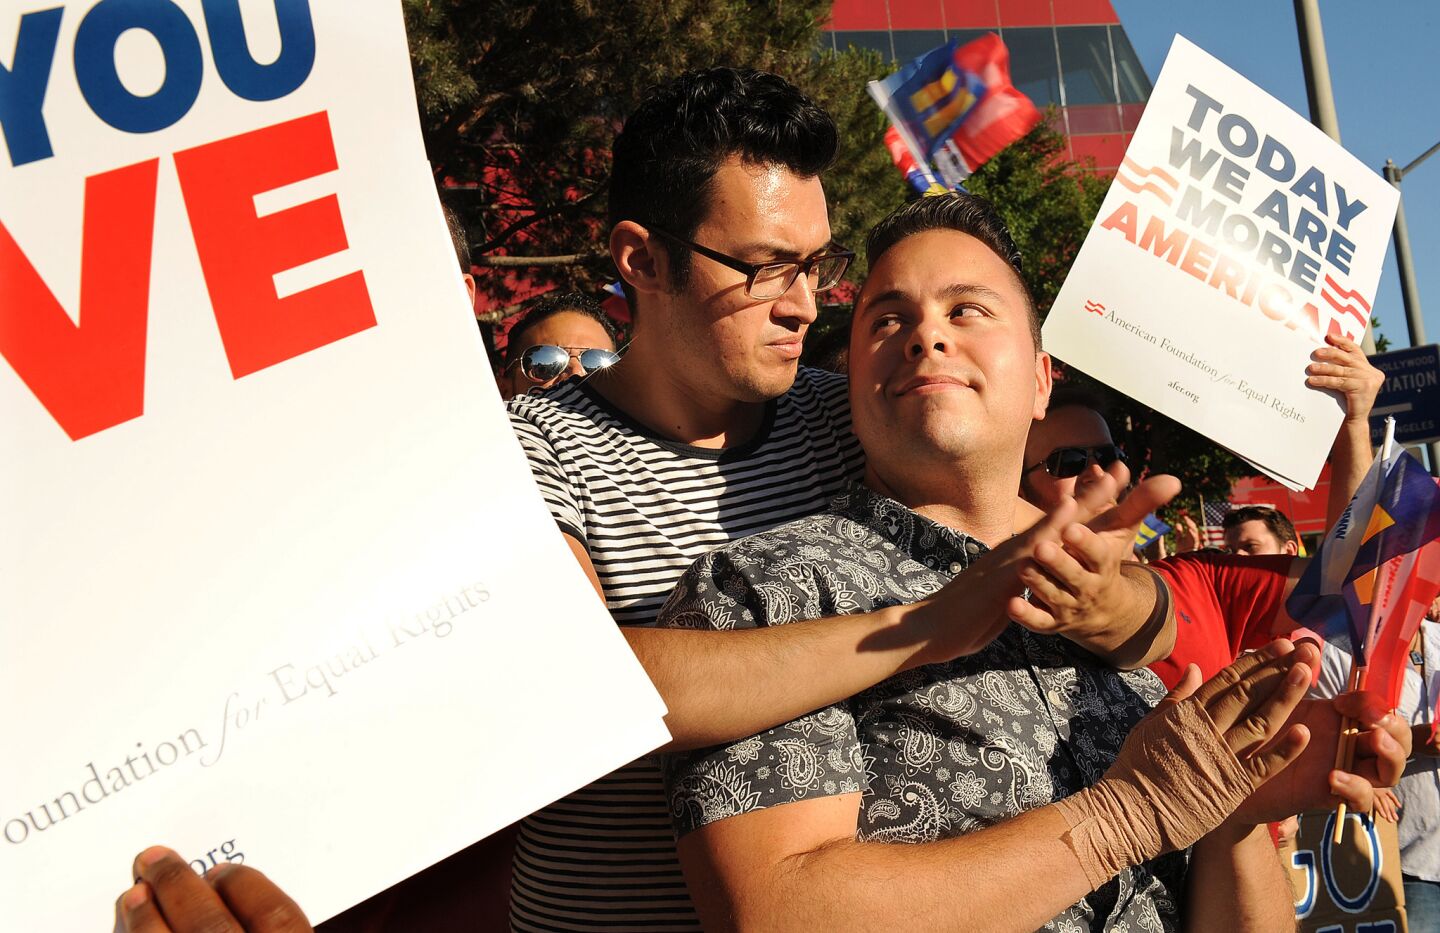 Vincent Cervantes, left, and his partner, Vince Pancucci, embrace during a rally in West Hollywood after the Supreme Court's ruling against Proposition 8.